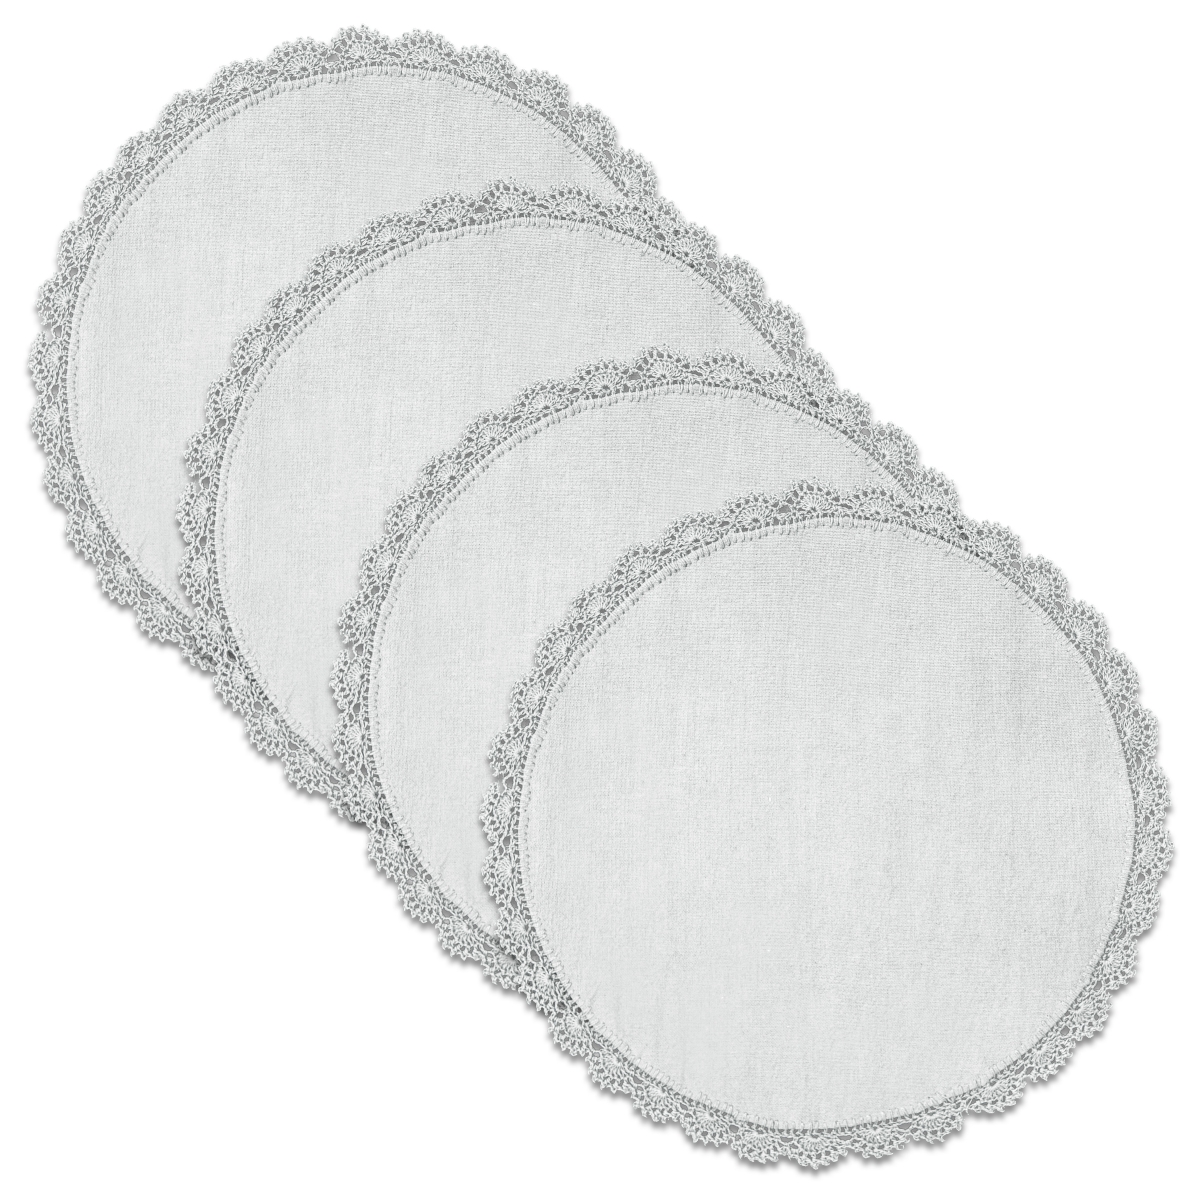 Picture of Heritage Lace CEPE-1200W-S 12 in. Crochet Envy Petal Edge Round Doily - White - Set of 4